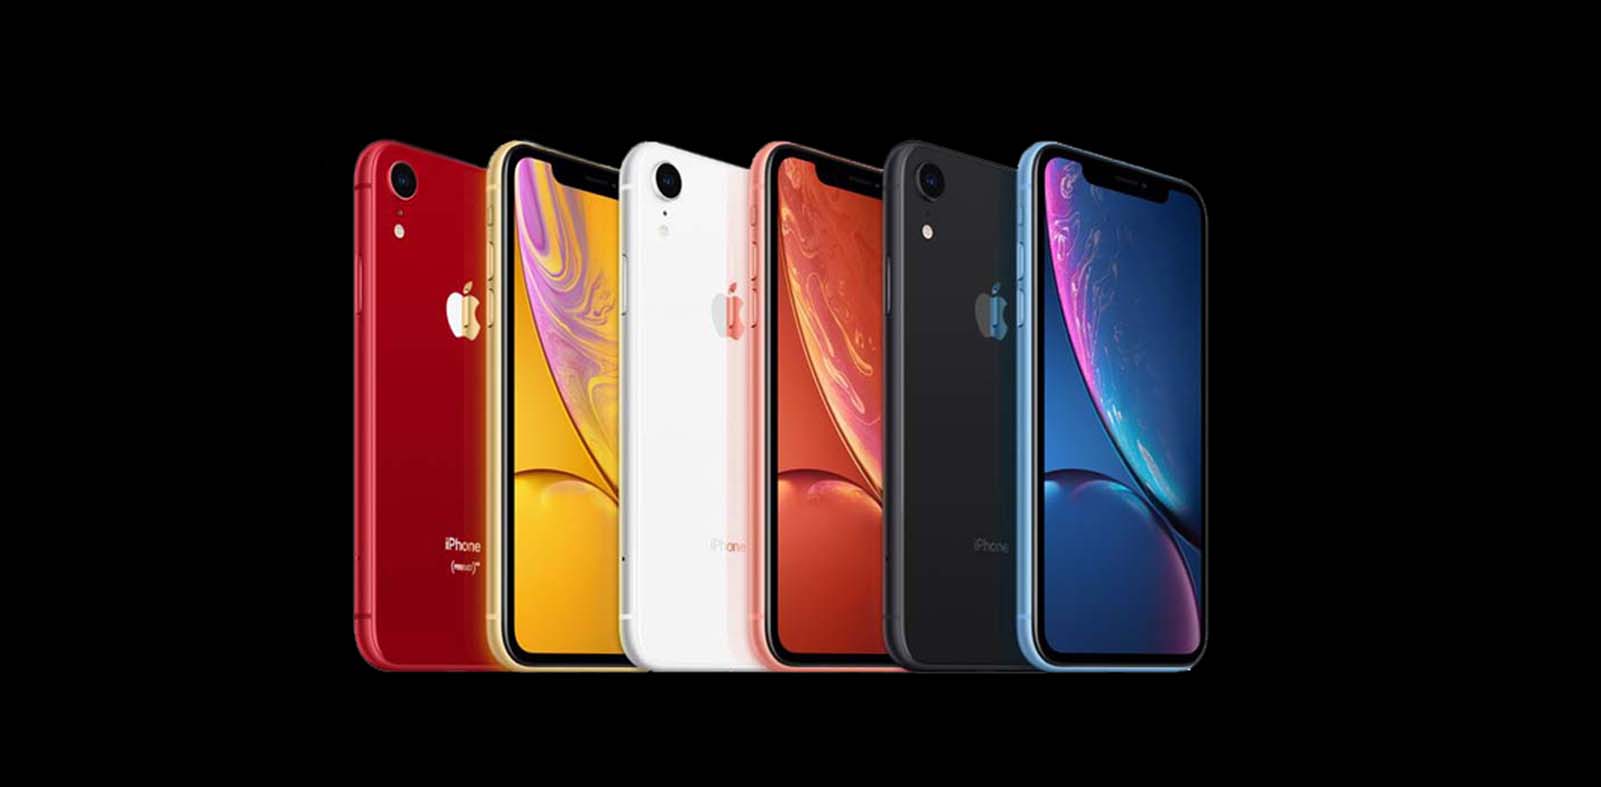 iphone xr in colors red, yellow, white, coral, black, and blue